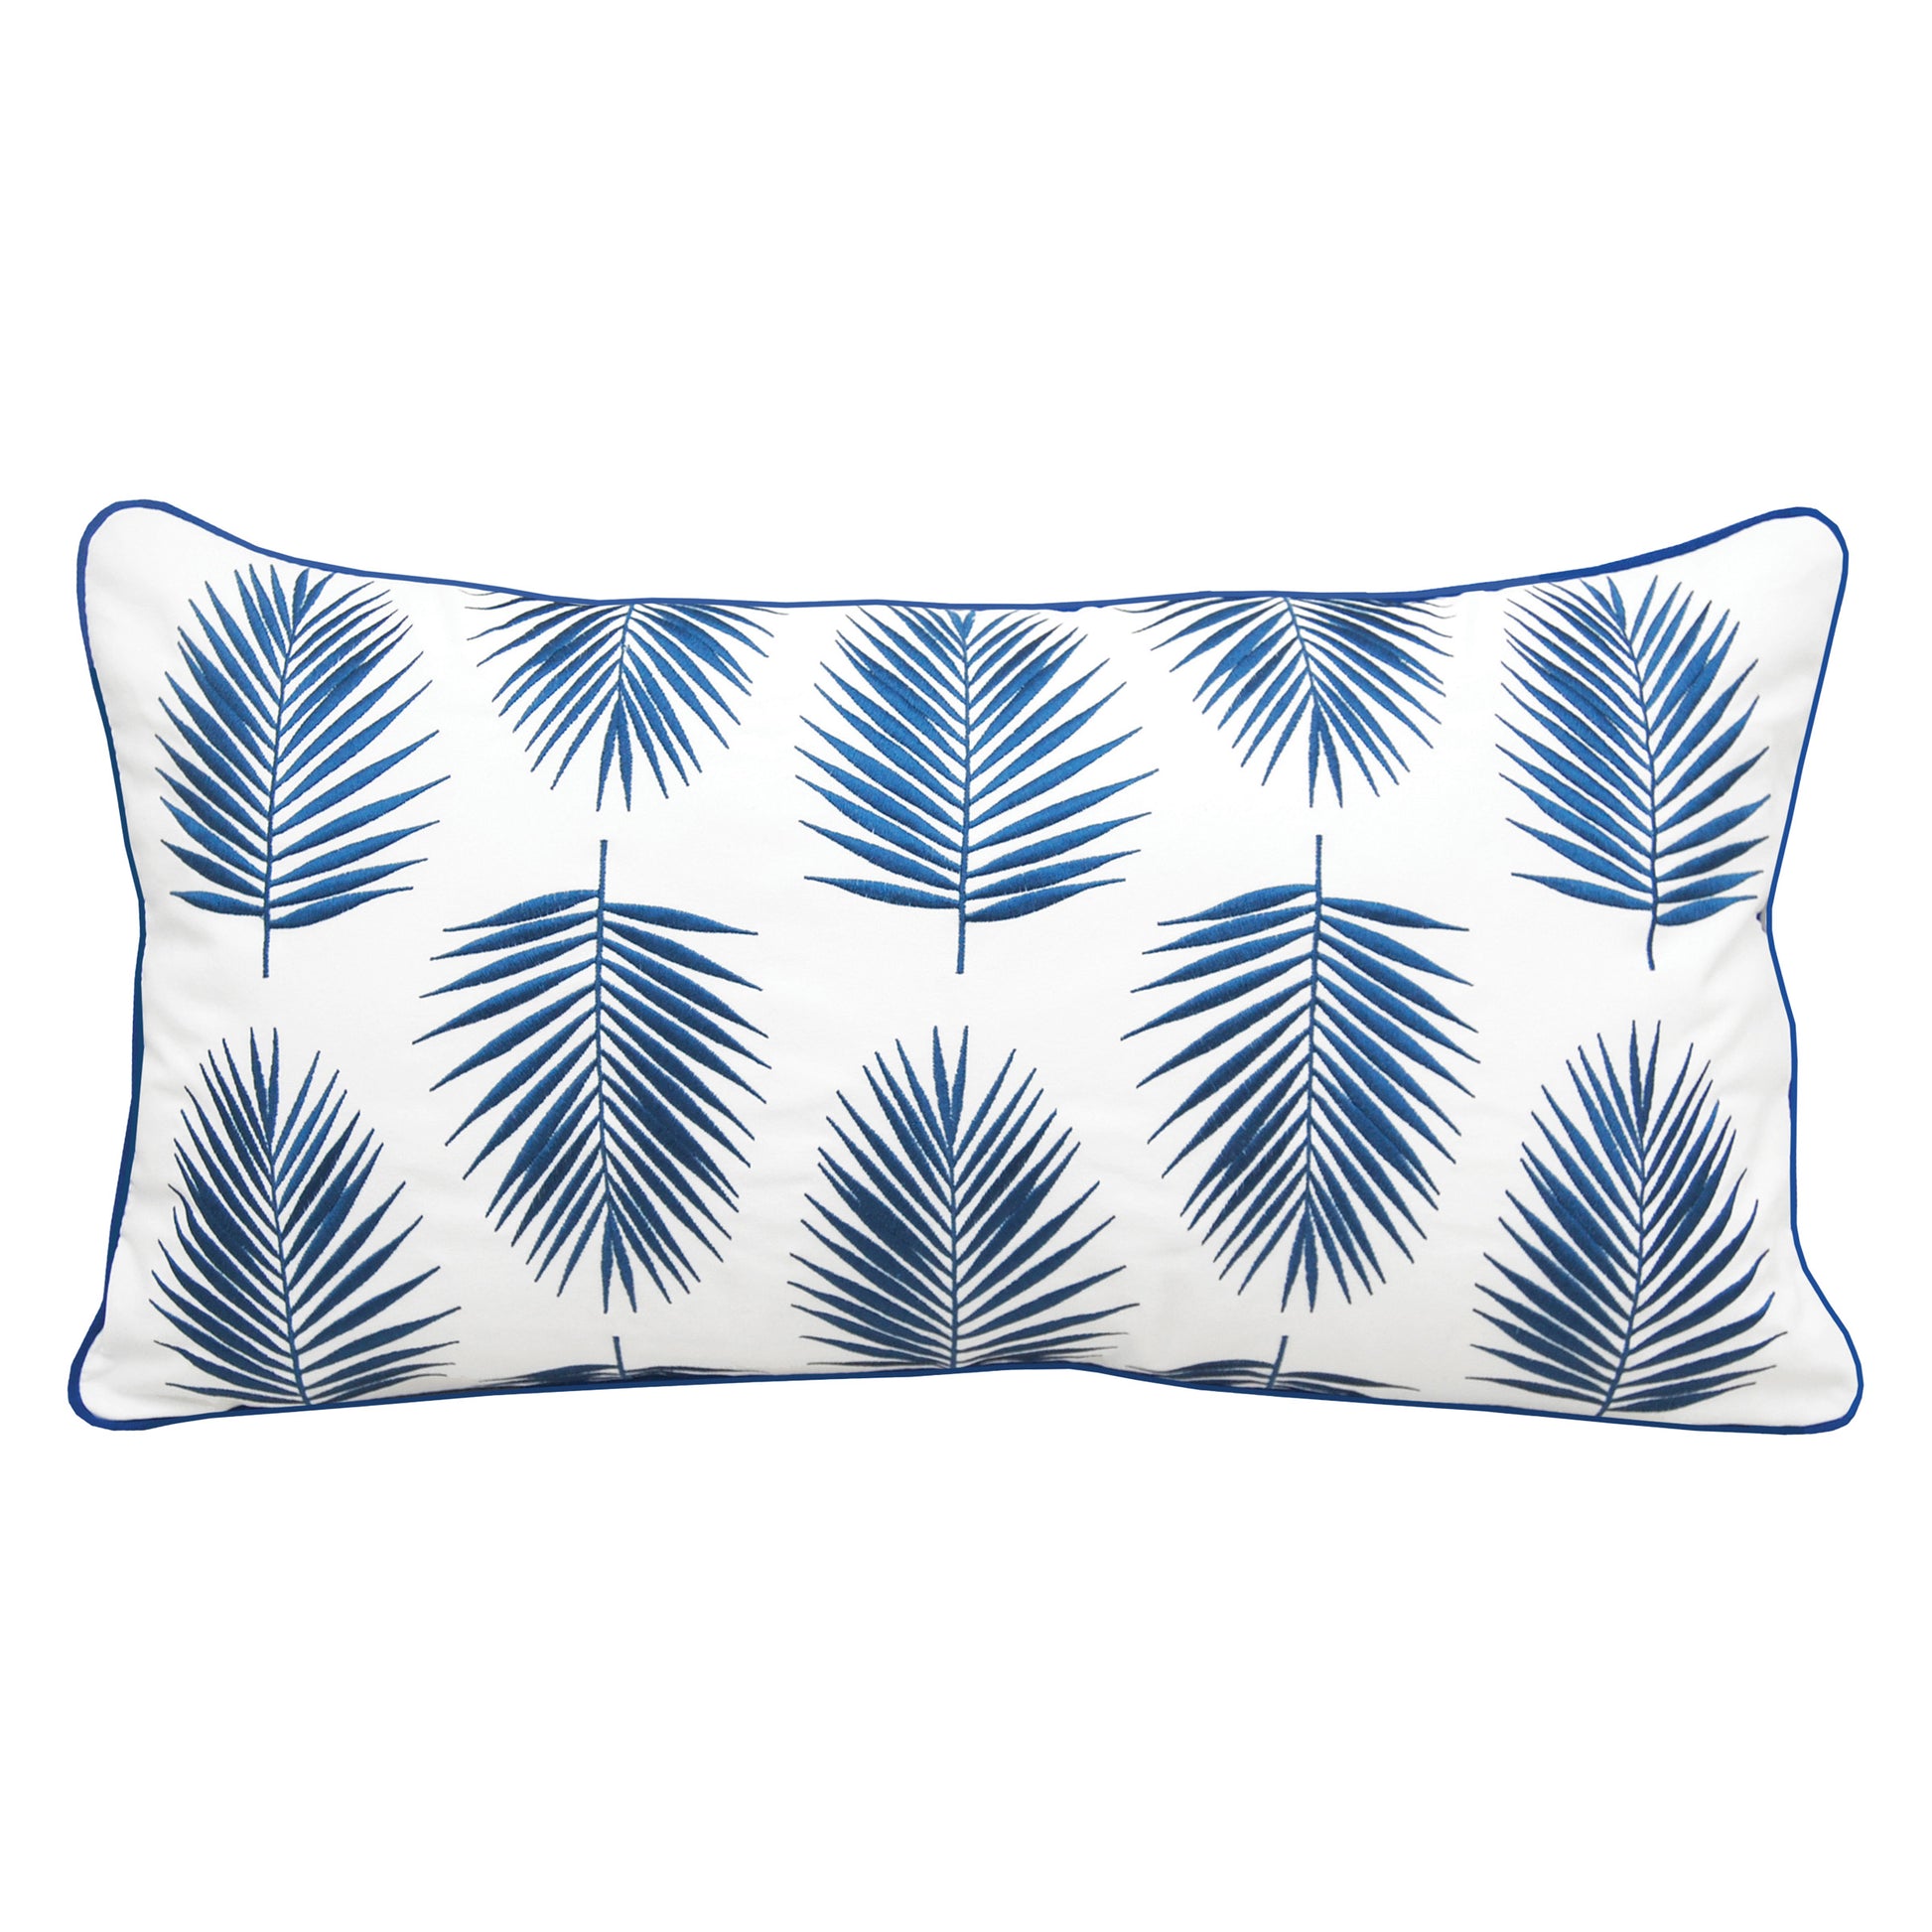 Alternating blue palms embroidered on a white background. Pillow is finished with a blue piped edging.